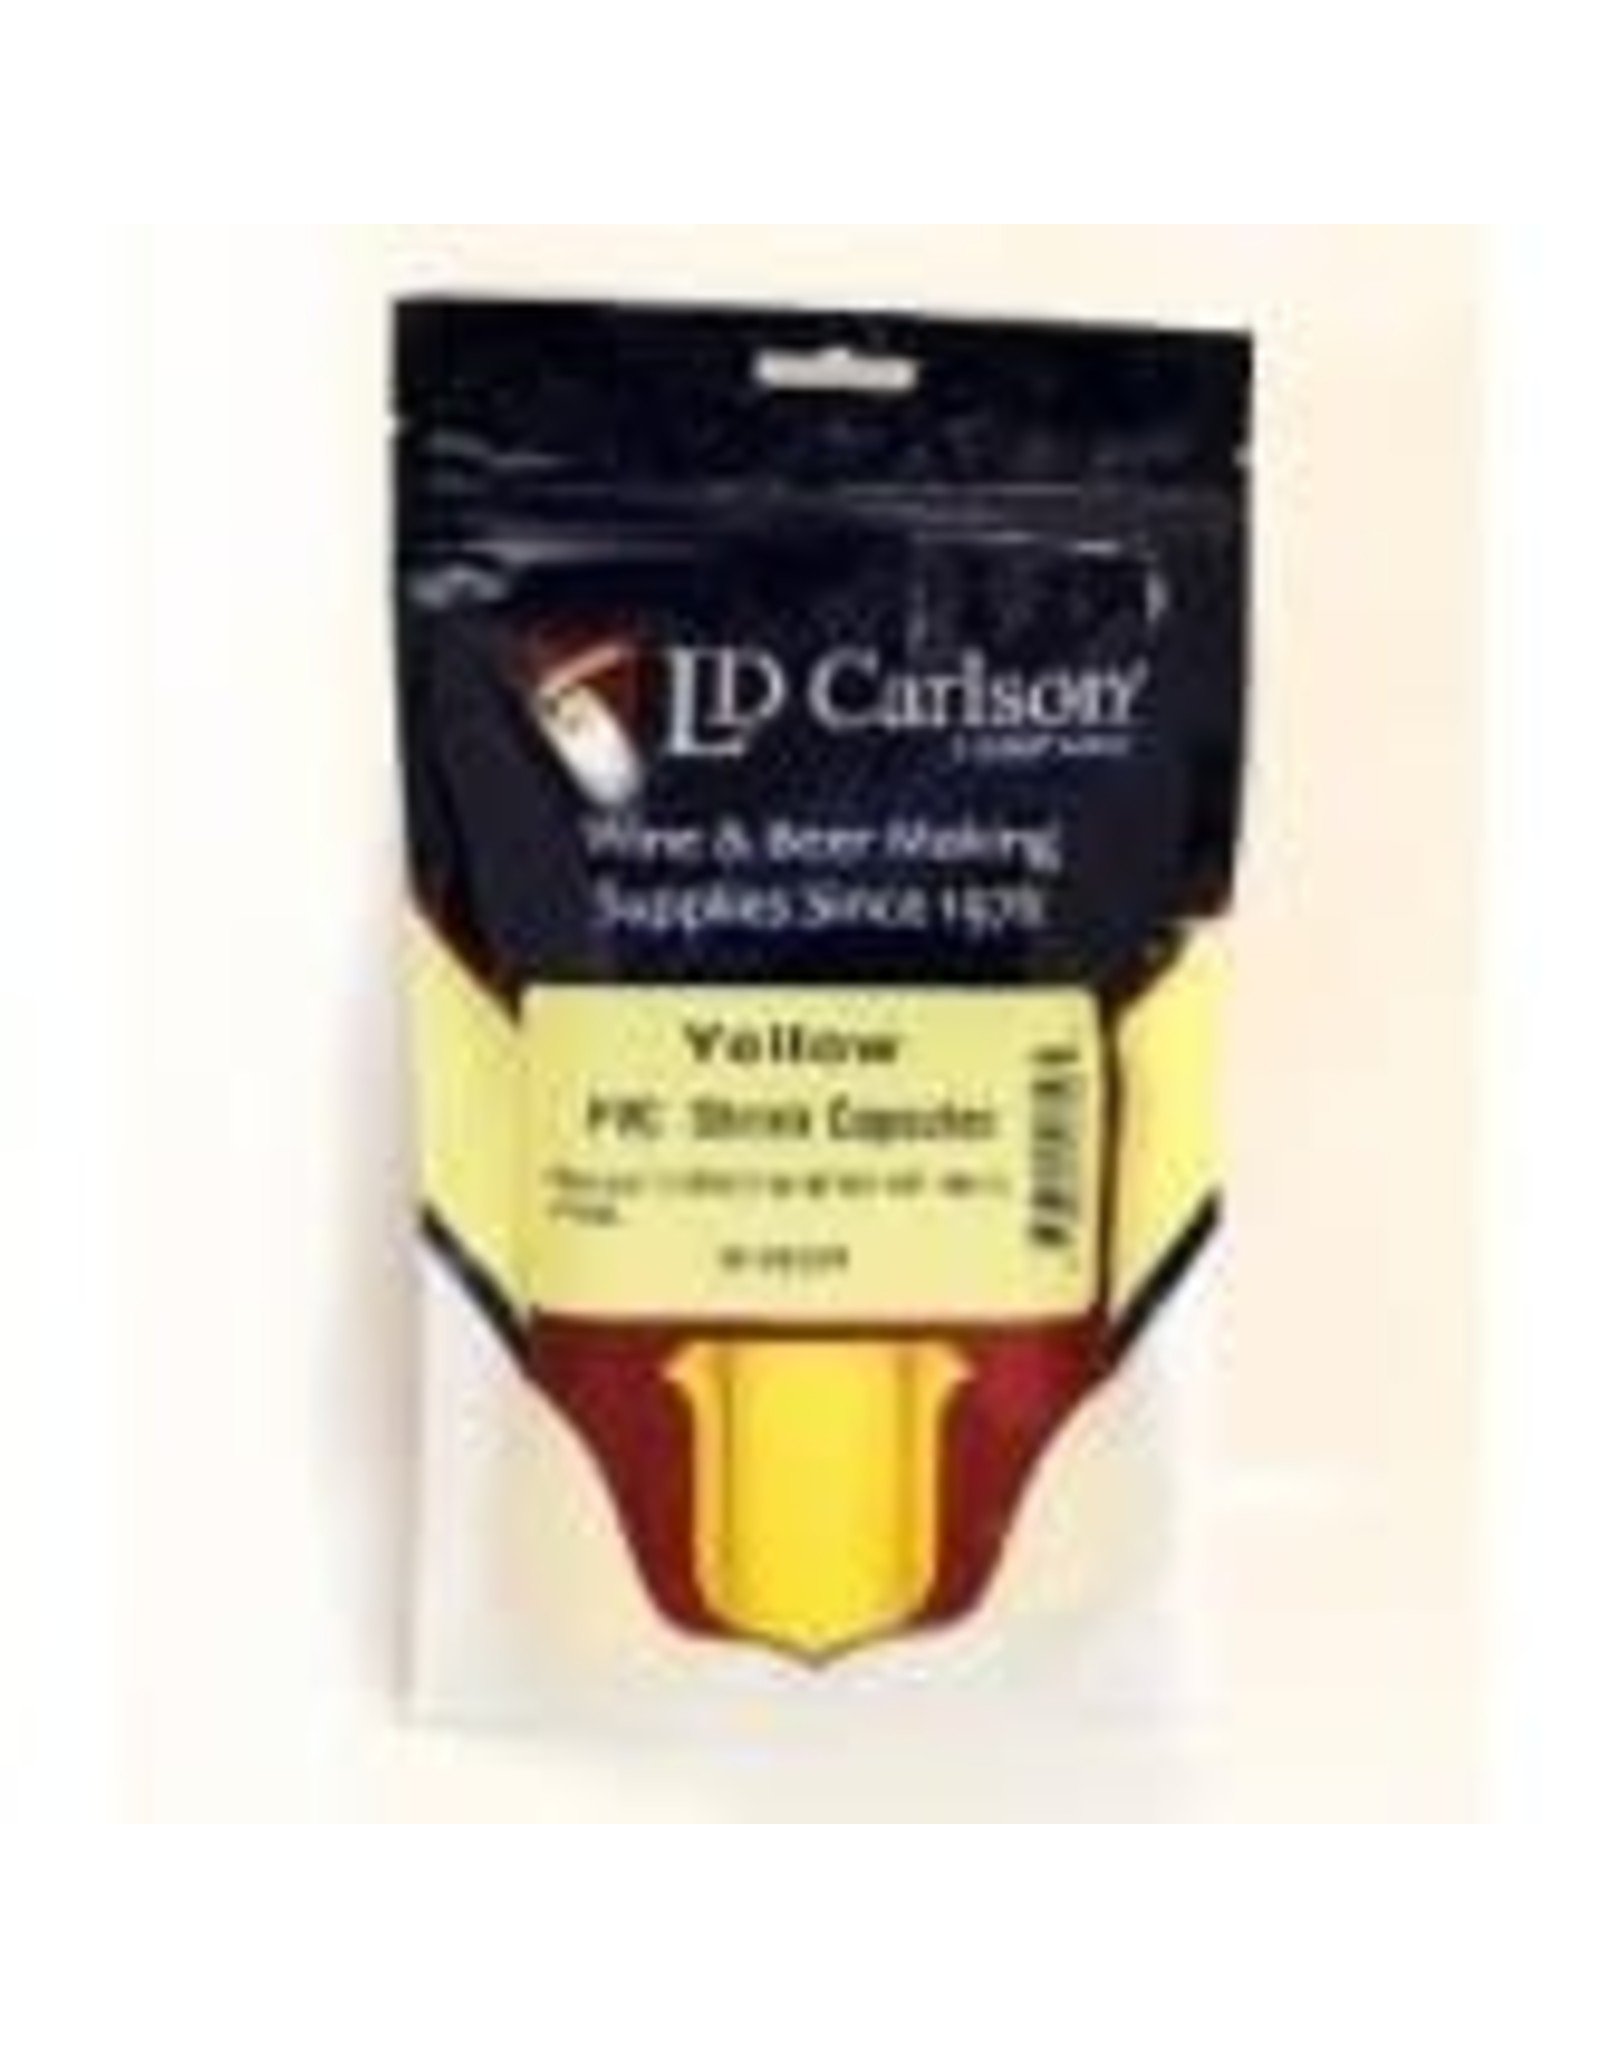 BREWERS BEST GLOSS YELLOW 30 PACK